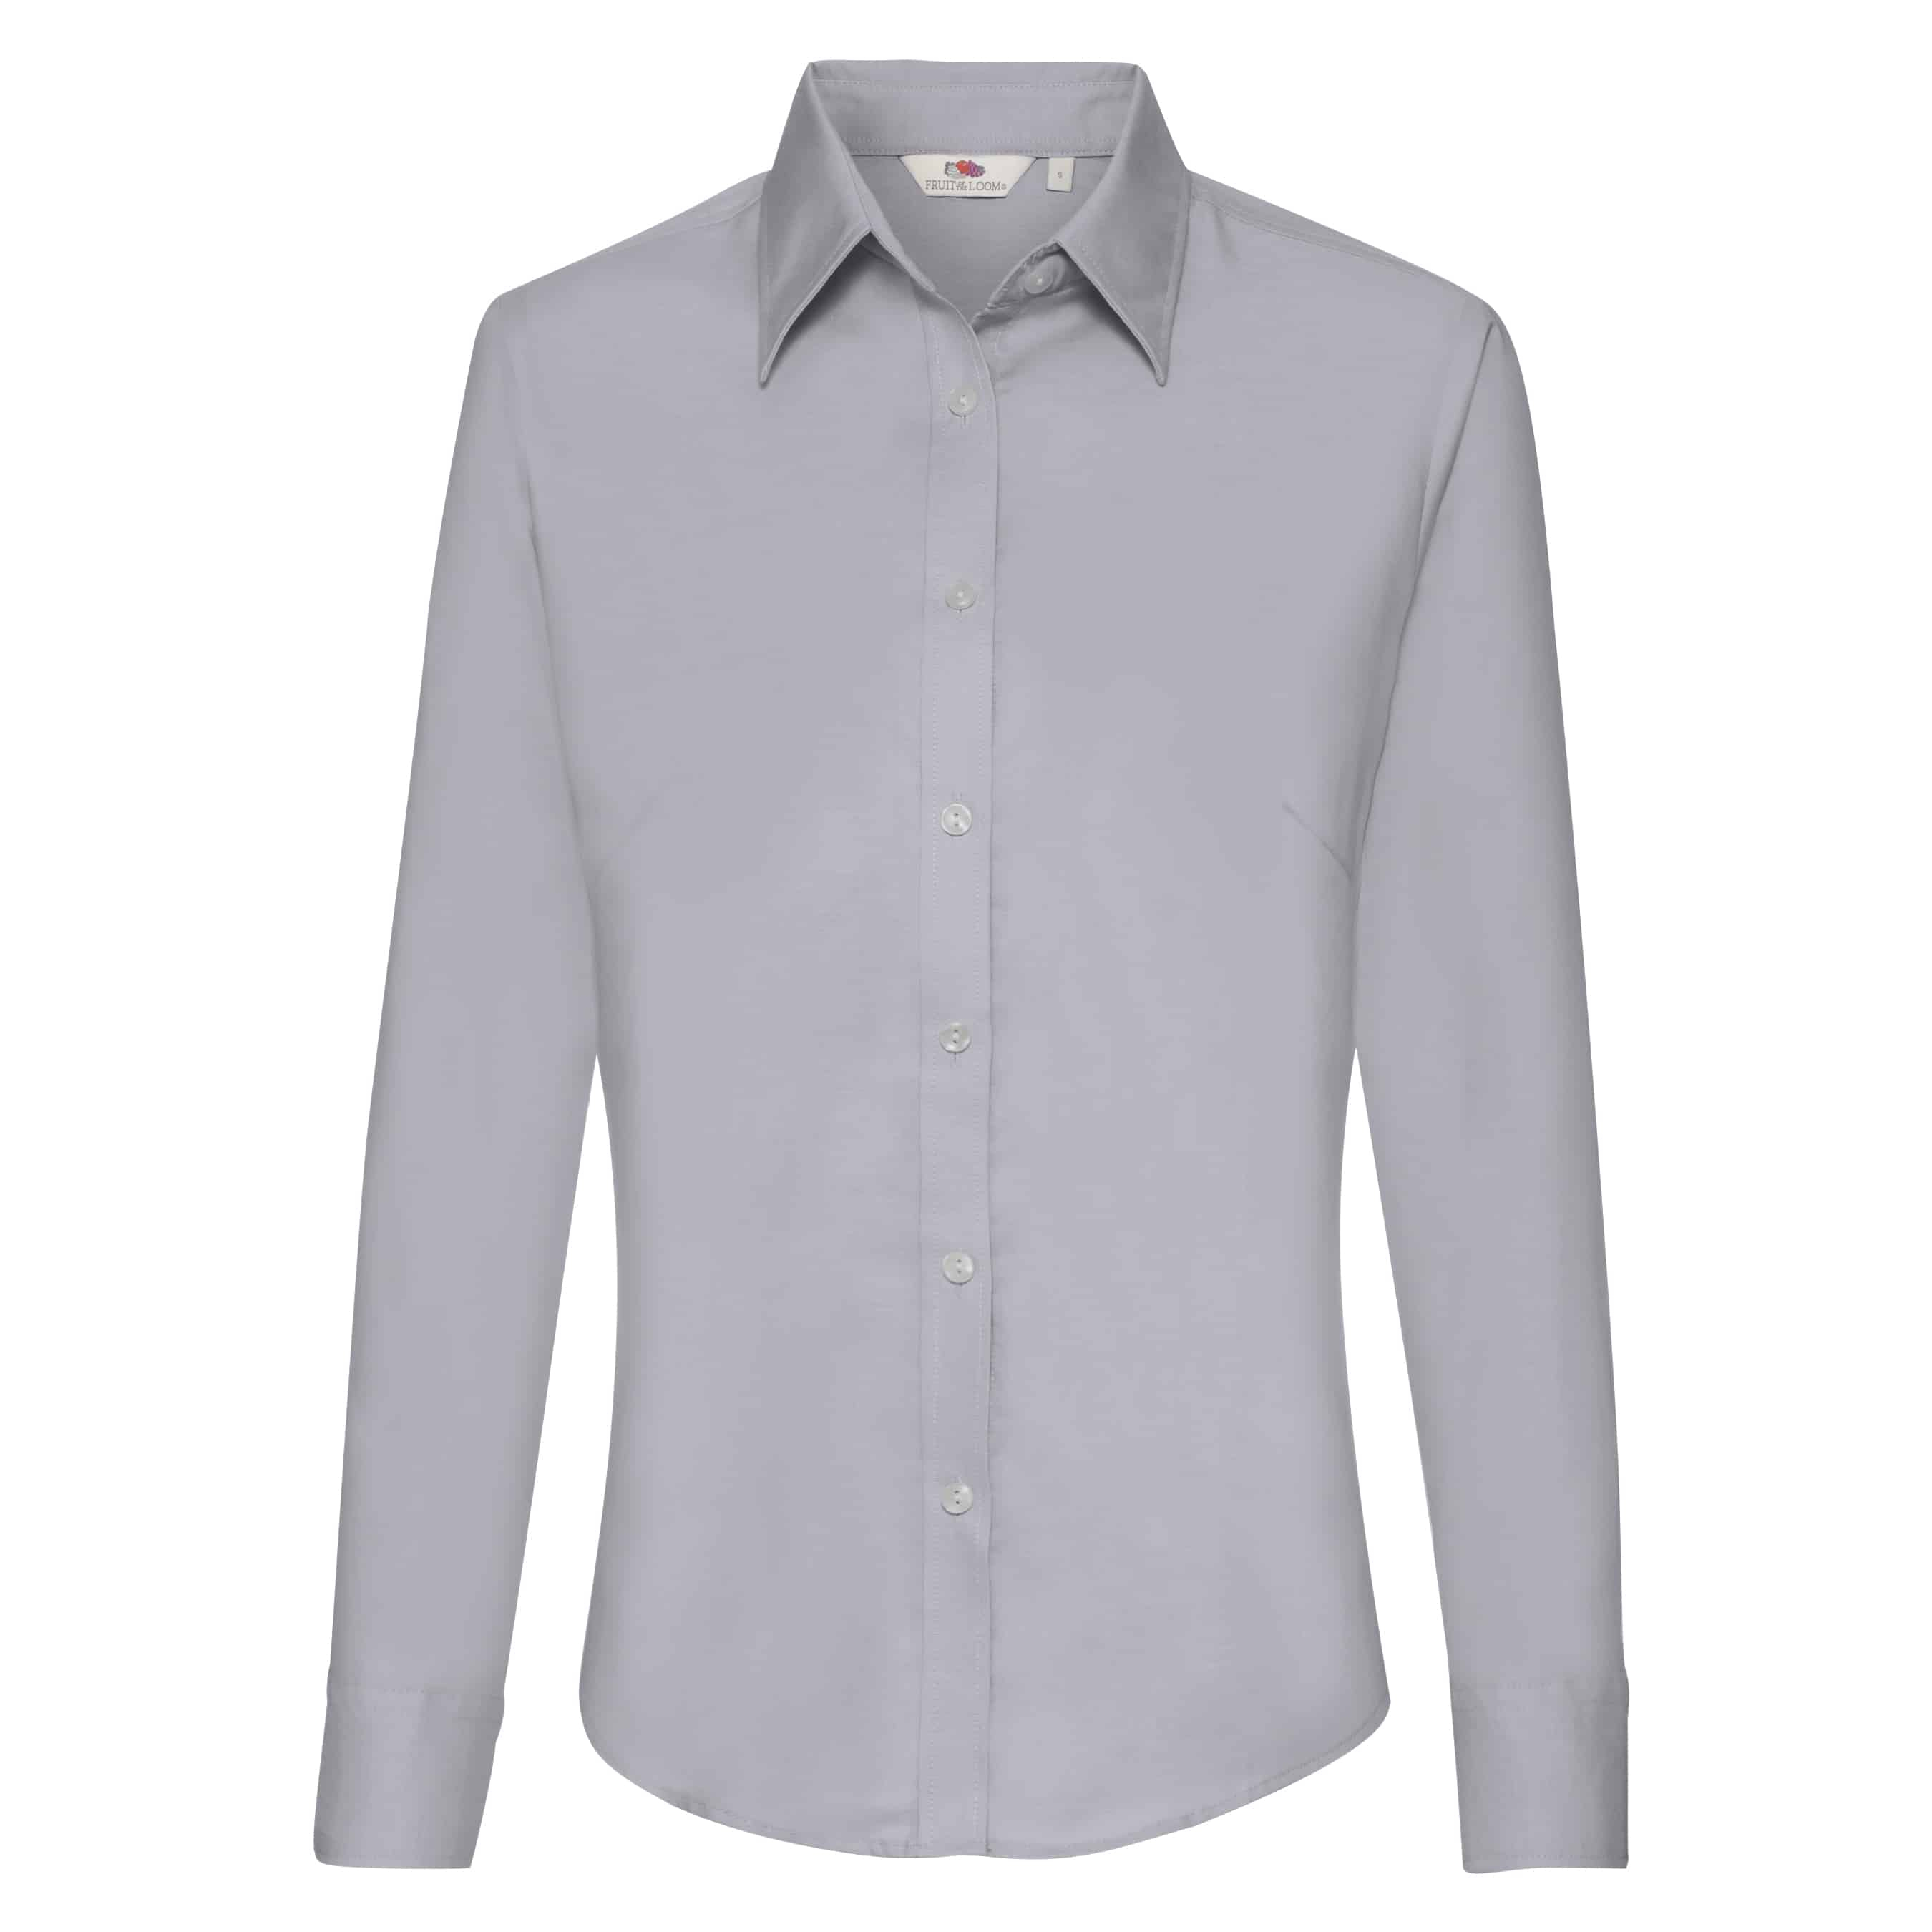 Women's Oxford Shirt with Long Sleeve Fruit Of The Loom Oxford Grey